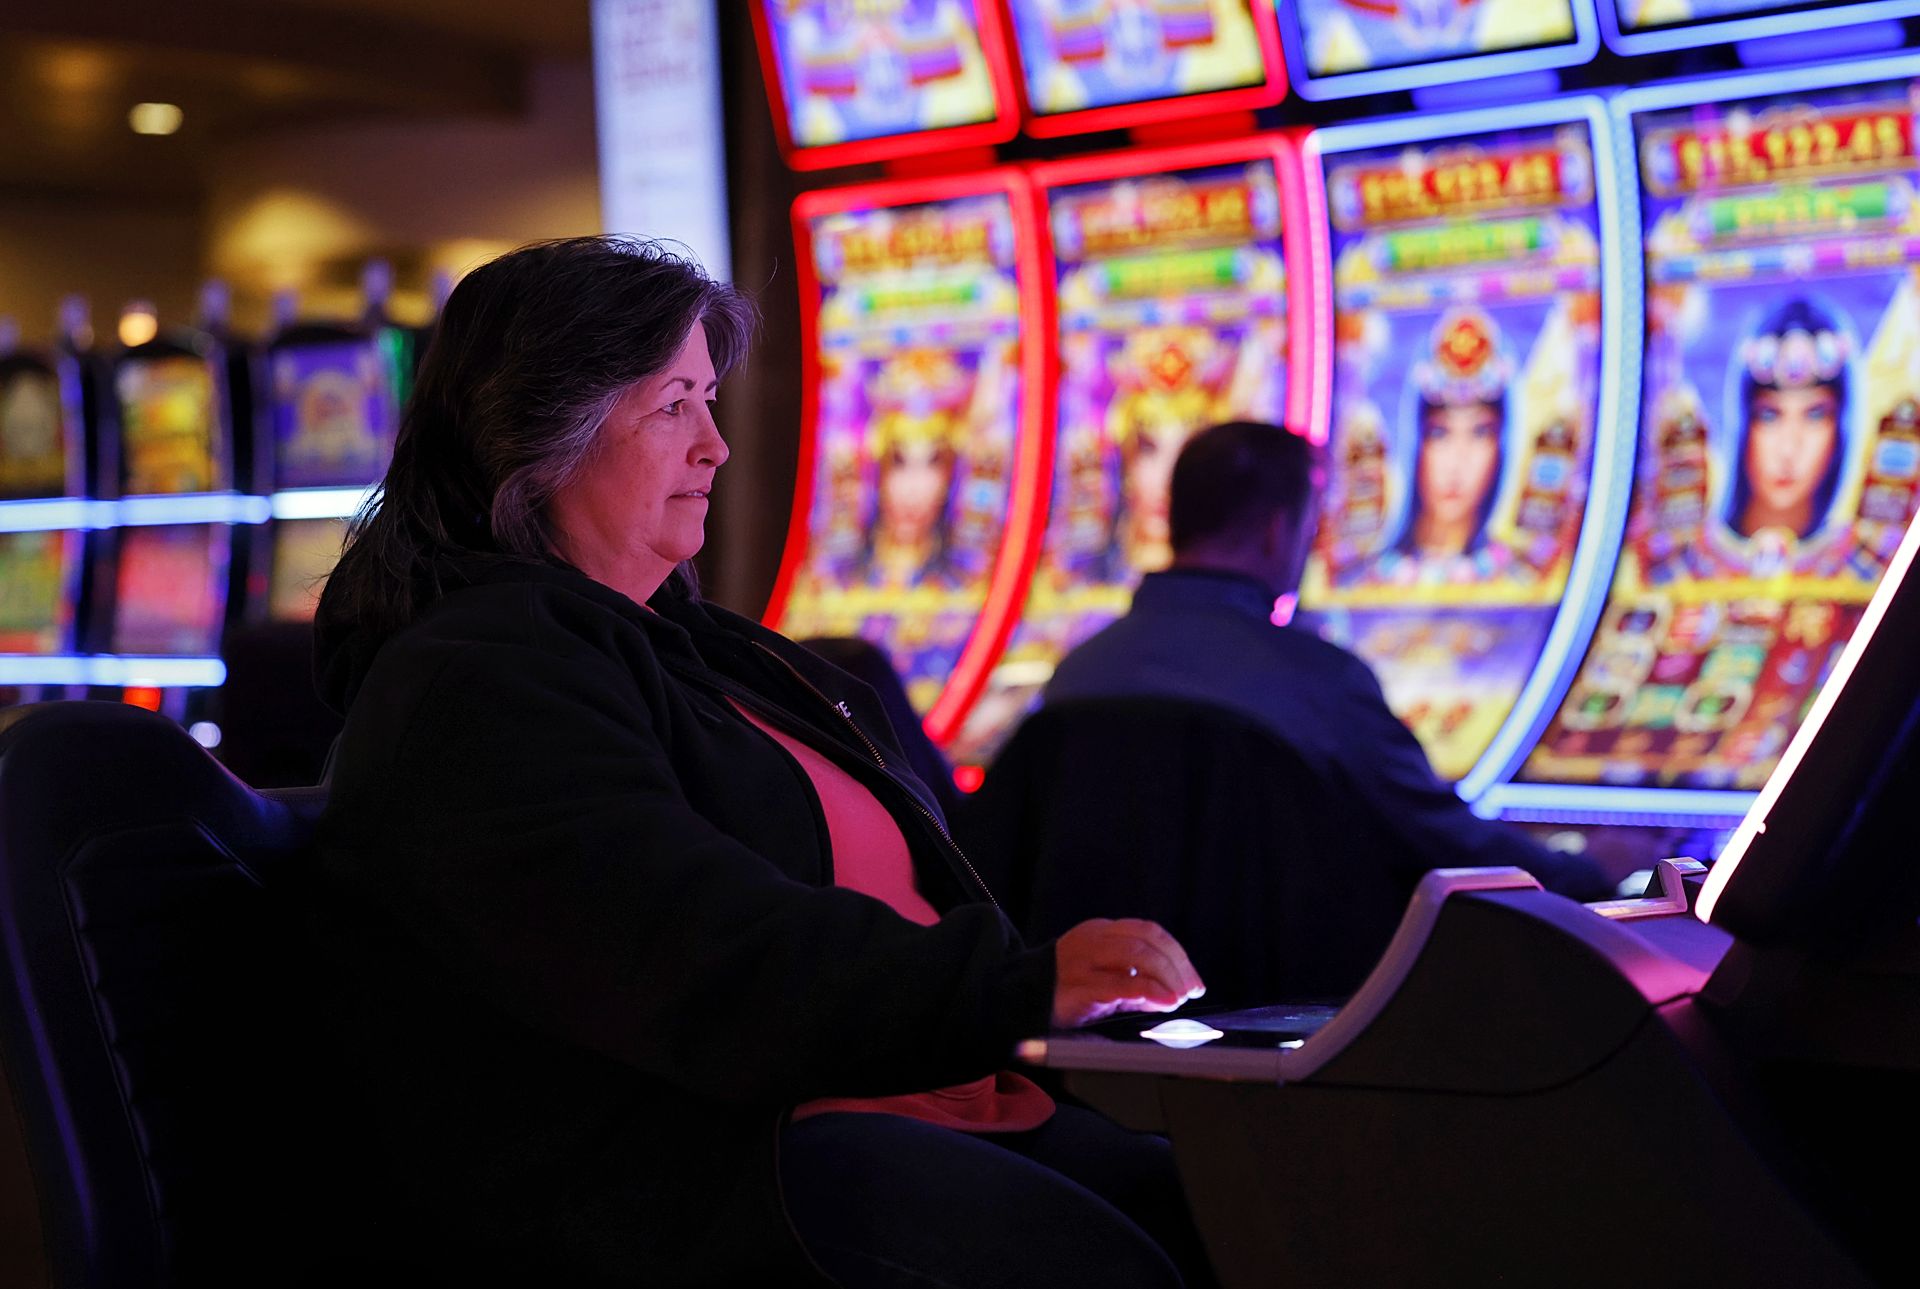 Tami Heinrich plays a game at Miami Valley Gaming on Thursday, January 6, 2022 in Lebanon.  NICK GRAHAM / STAFF